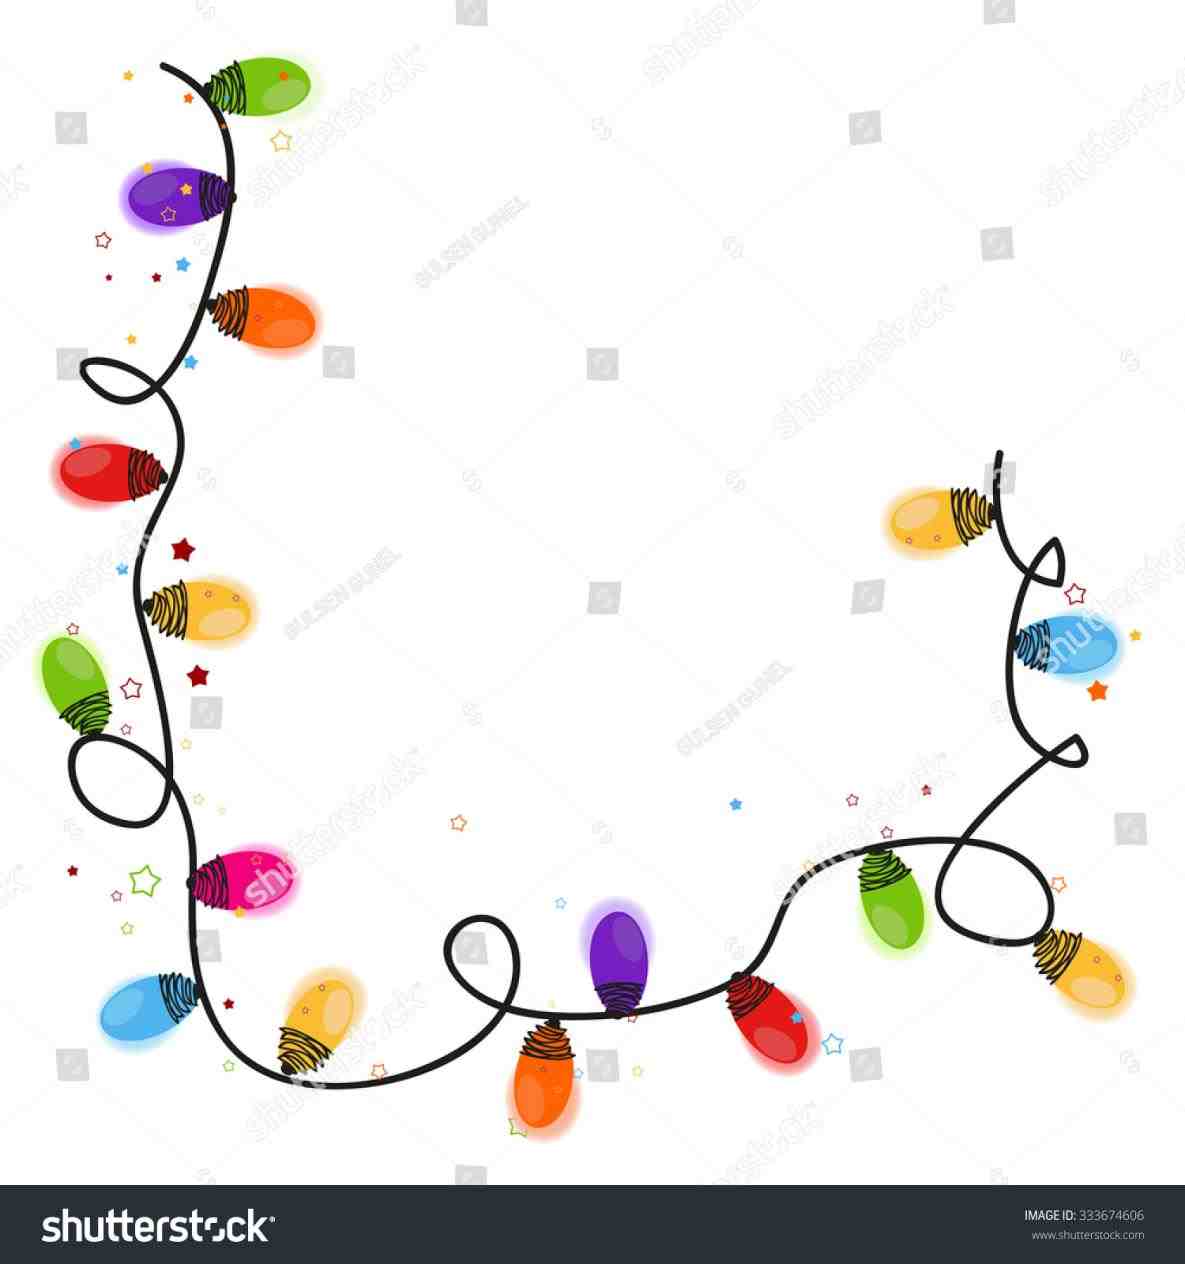 christmas-light-borders-clipart-free-download-on-clipartmag